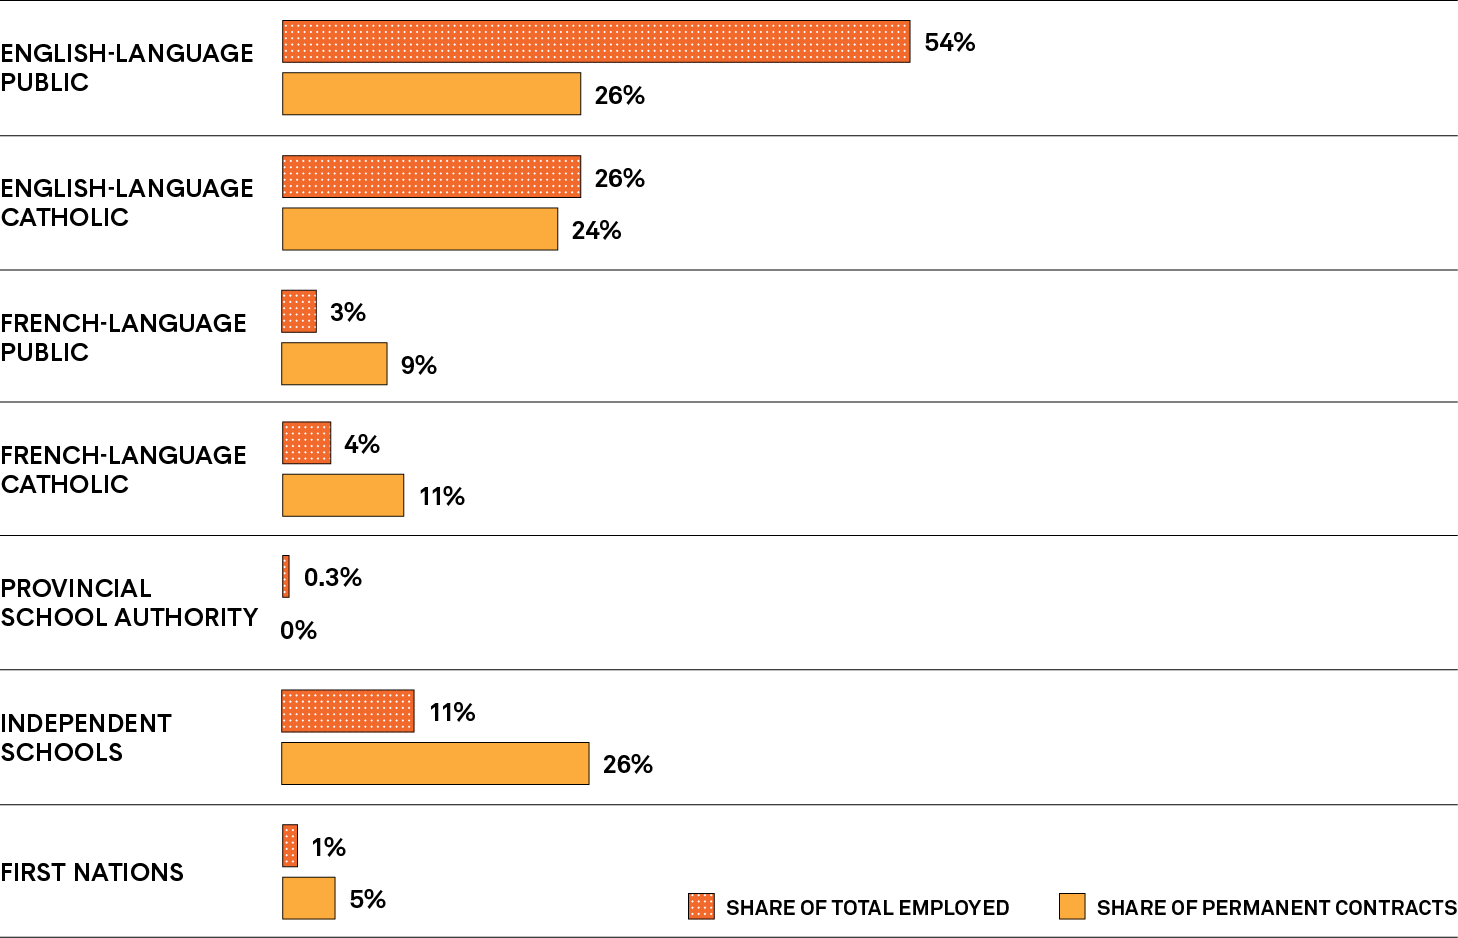 A bar graph shows the percentages of first-year teacher employers that were English-language public boards, English-language Catholic boards, French-language public boards, French-language Catholic boards, provincial school authorities, Independent schools and First Nations schools. Long description follows.